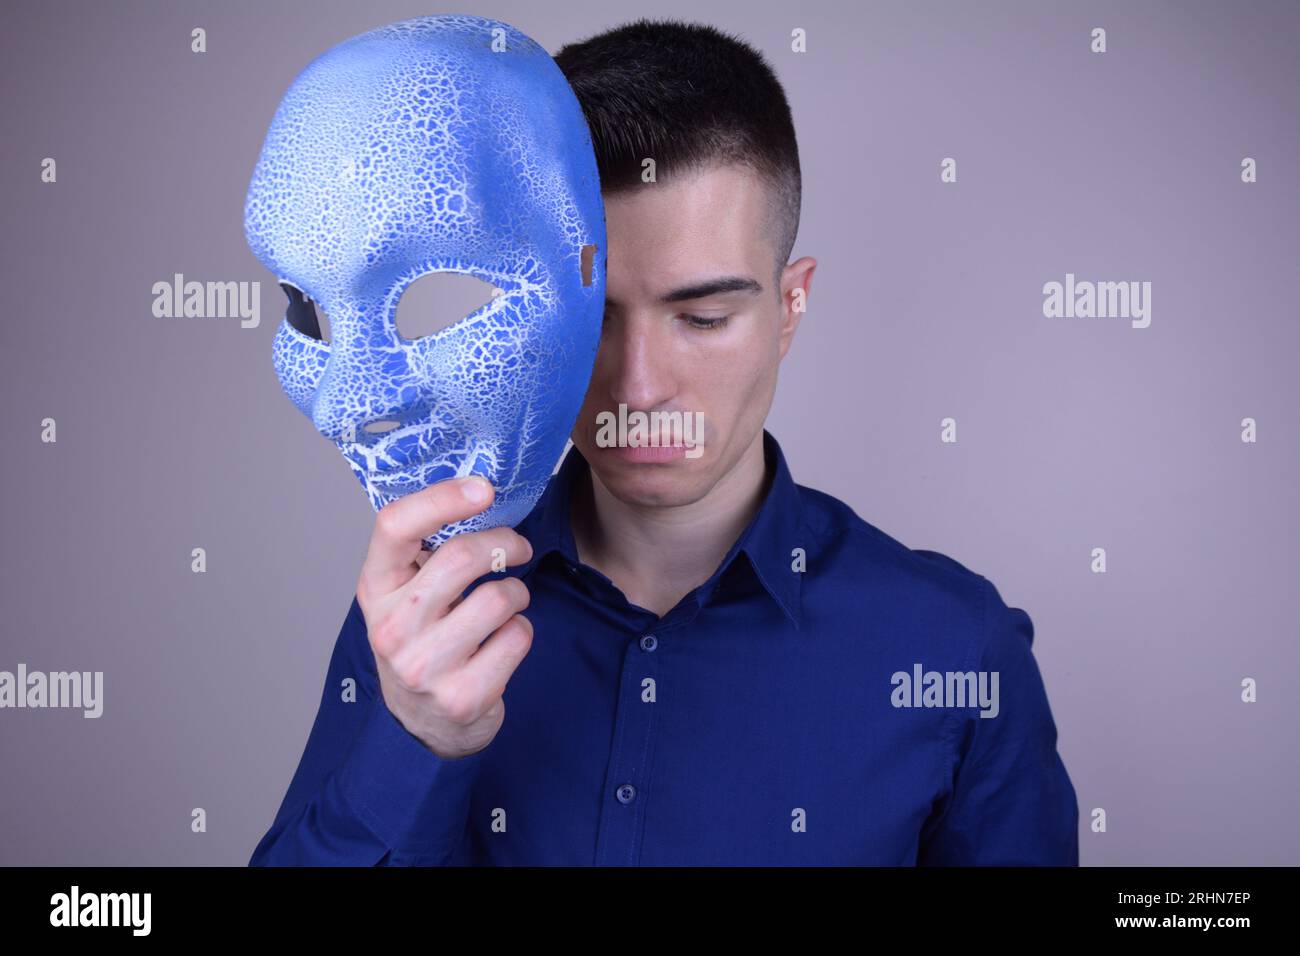 Sad Elegant Man Holding a Mask in Front of His Face on Isolated Background Stock Photo